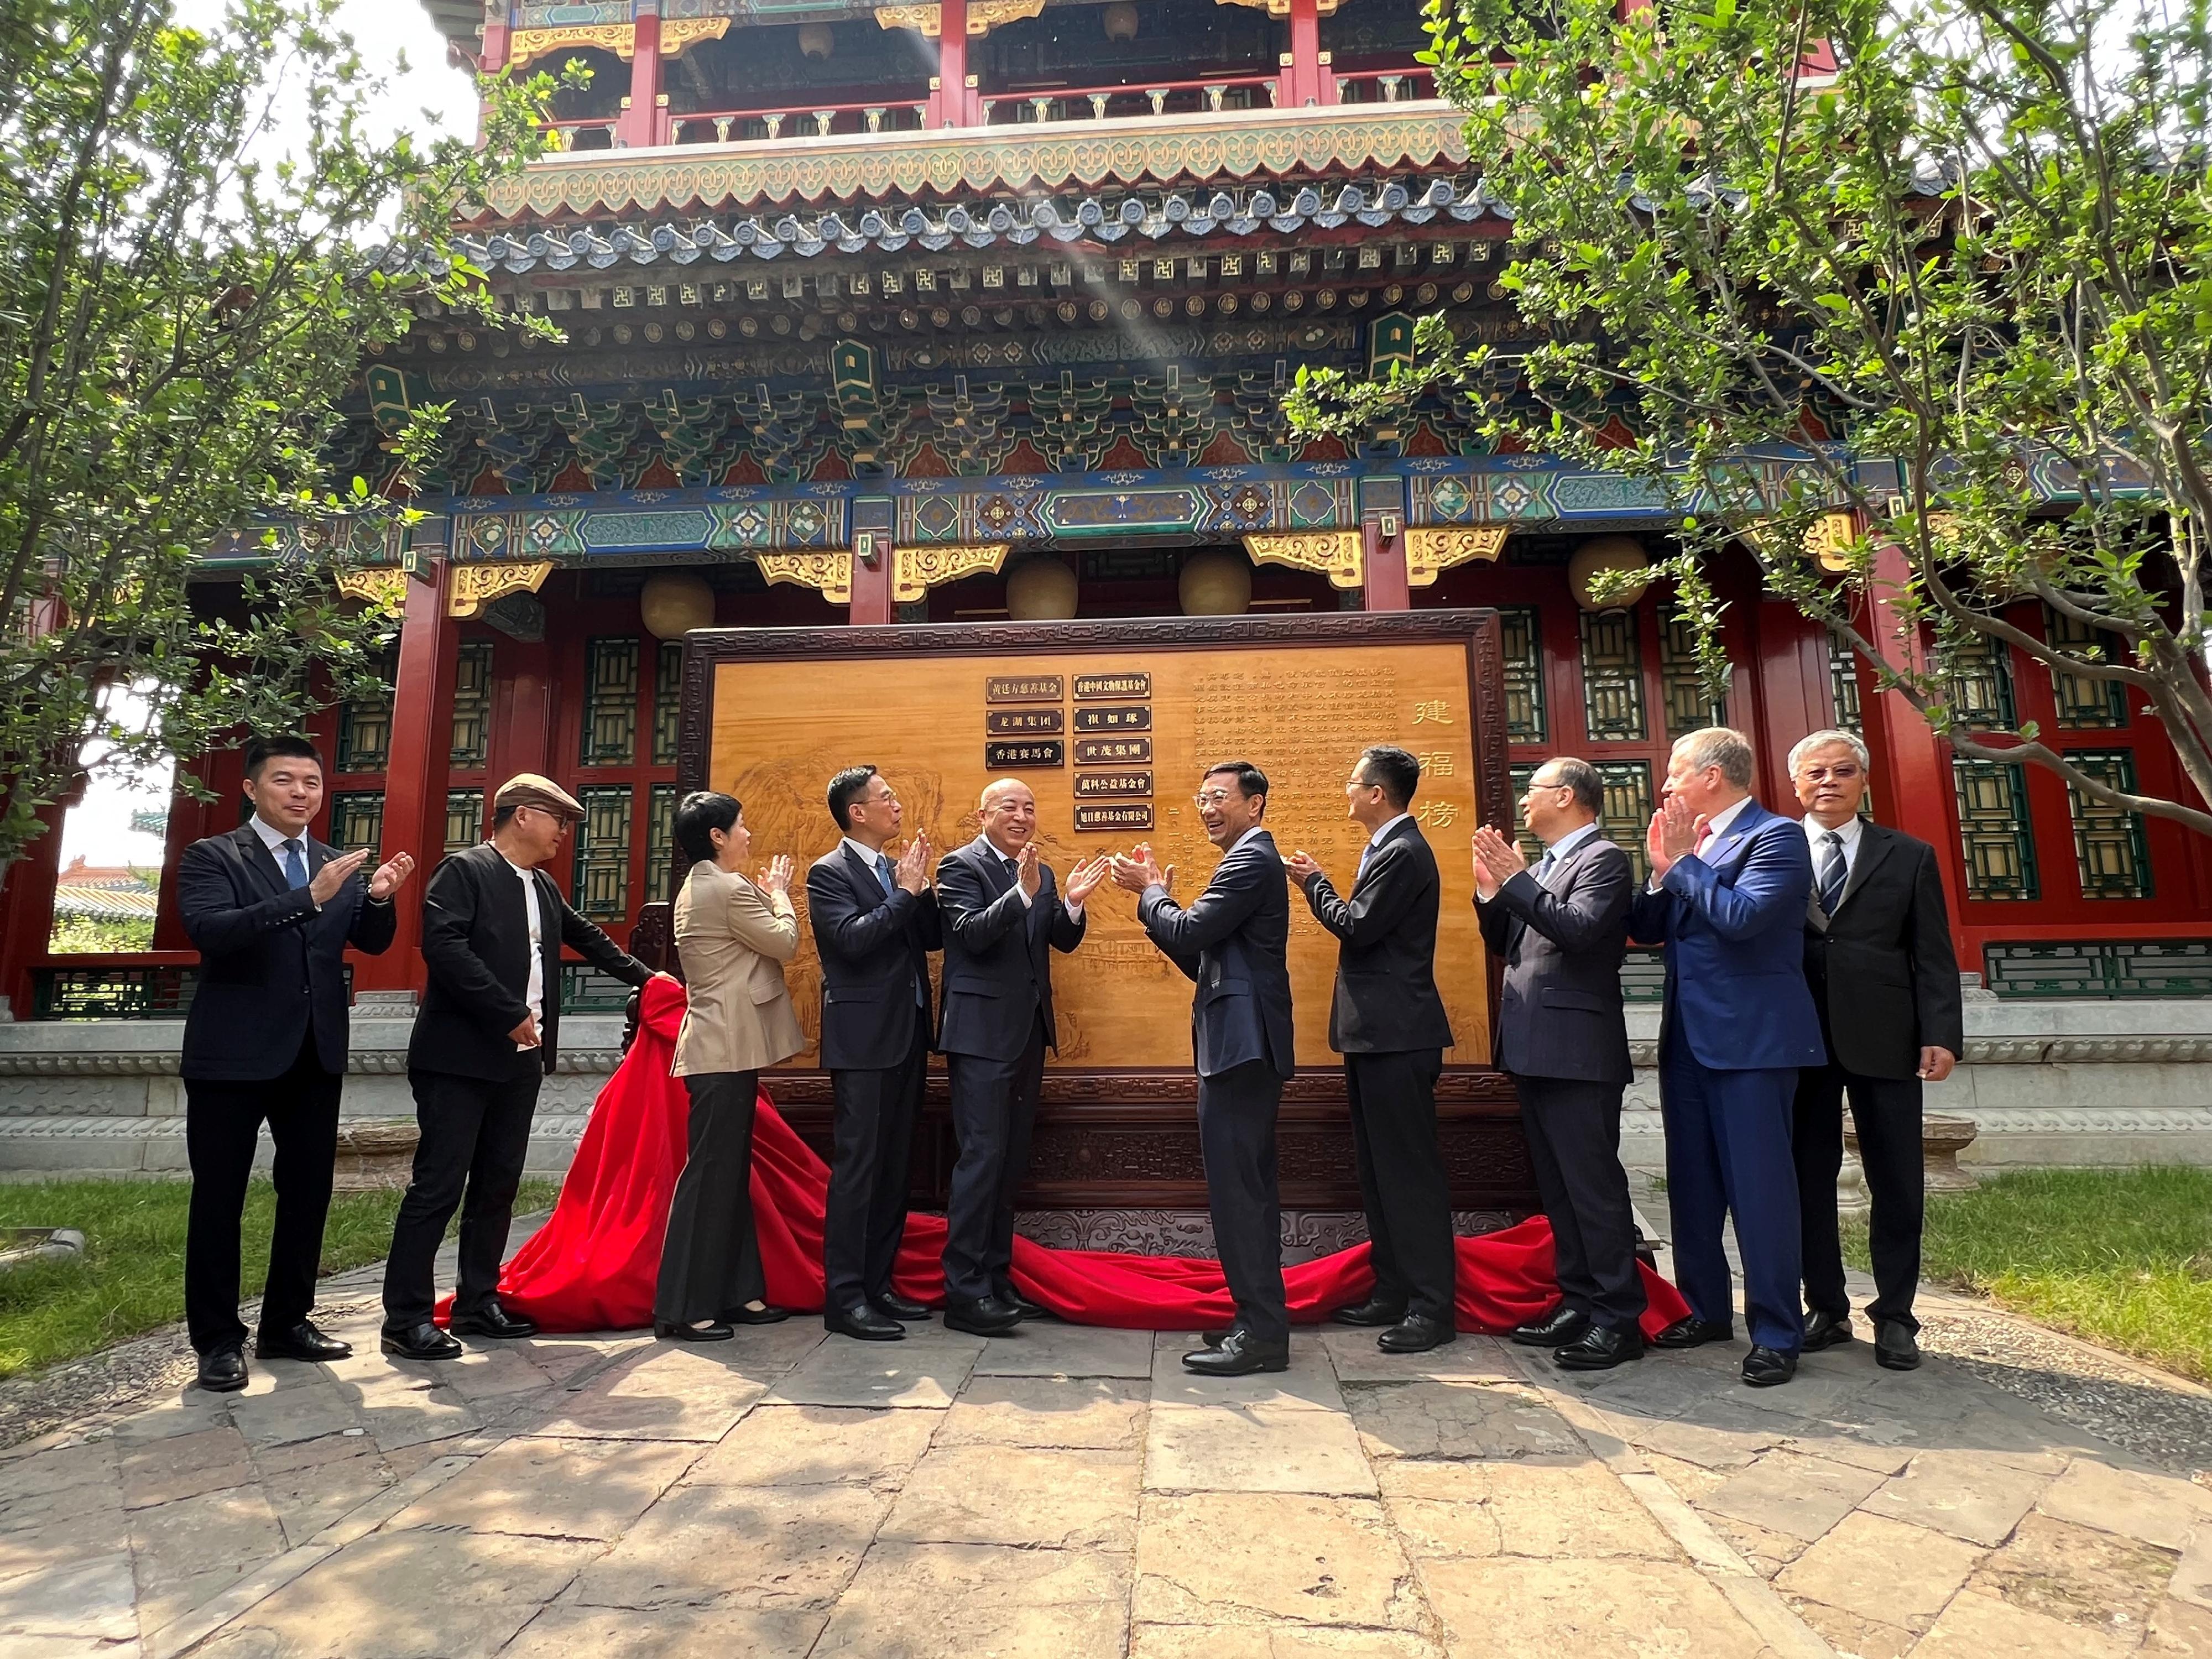 The Secretary for Culture, Sports and Tourism, Mr Kevin Yeung, today (May 10) witnessed the signing of the Memorandum of Co-operation on the Promotion of Chinese Culture and Arts Tech Talent Development in the Mainland and Hong Kong between the Palace Museum and the Hong Kong Jockey Club (HKJC) in Beijing. Photo shows Mr Yeung (fourth left); the Director of the Palace Museum, Dr Wang Xudong (fifth left); and the Chairman of the HKJC, Mr Michael Lee (fifth right), attending the Plaque Unveiling Ceremony for the Jianfu Honour Roll with the additional acknowledgement of the HKJC.